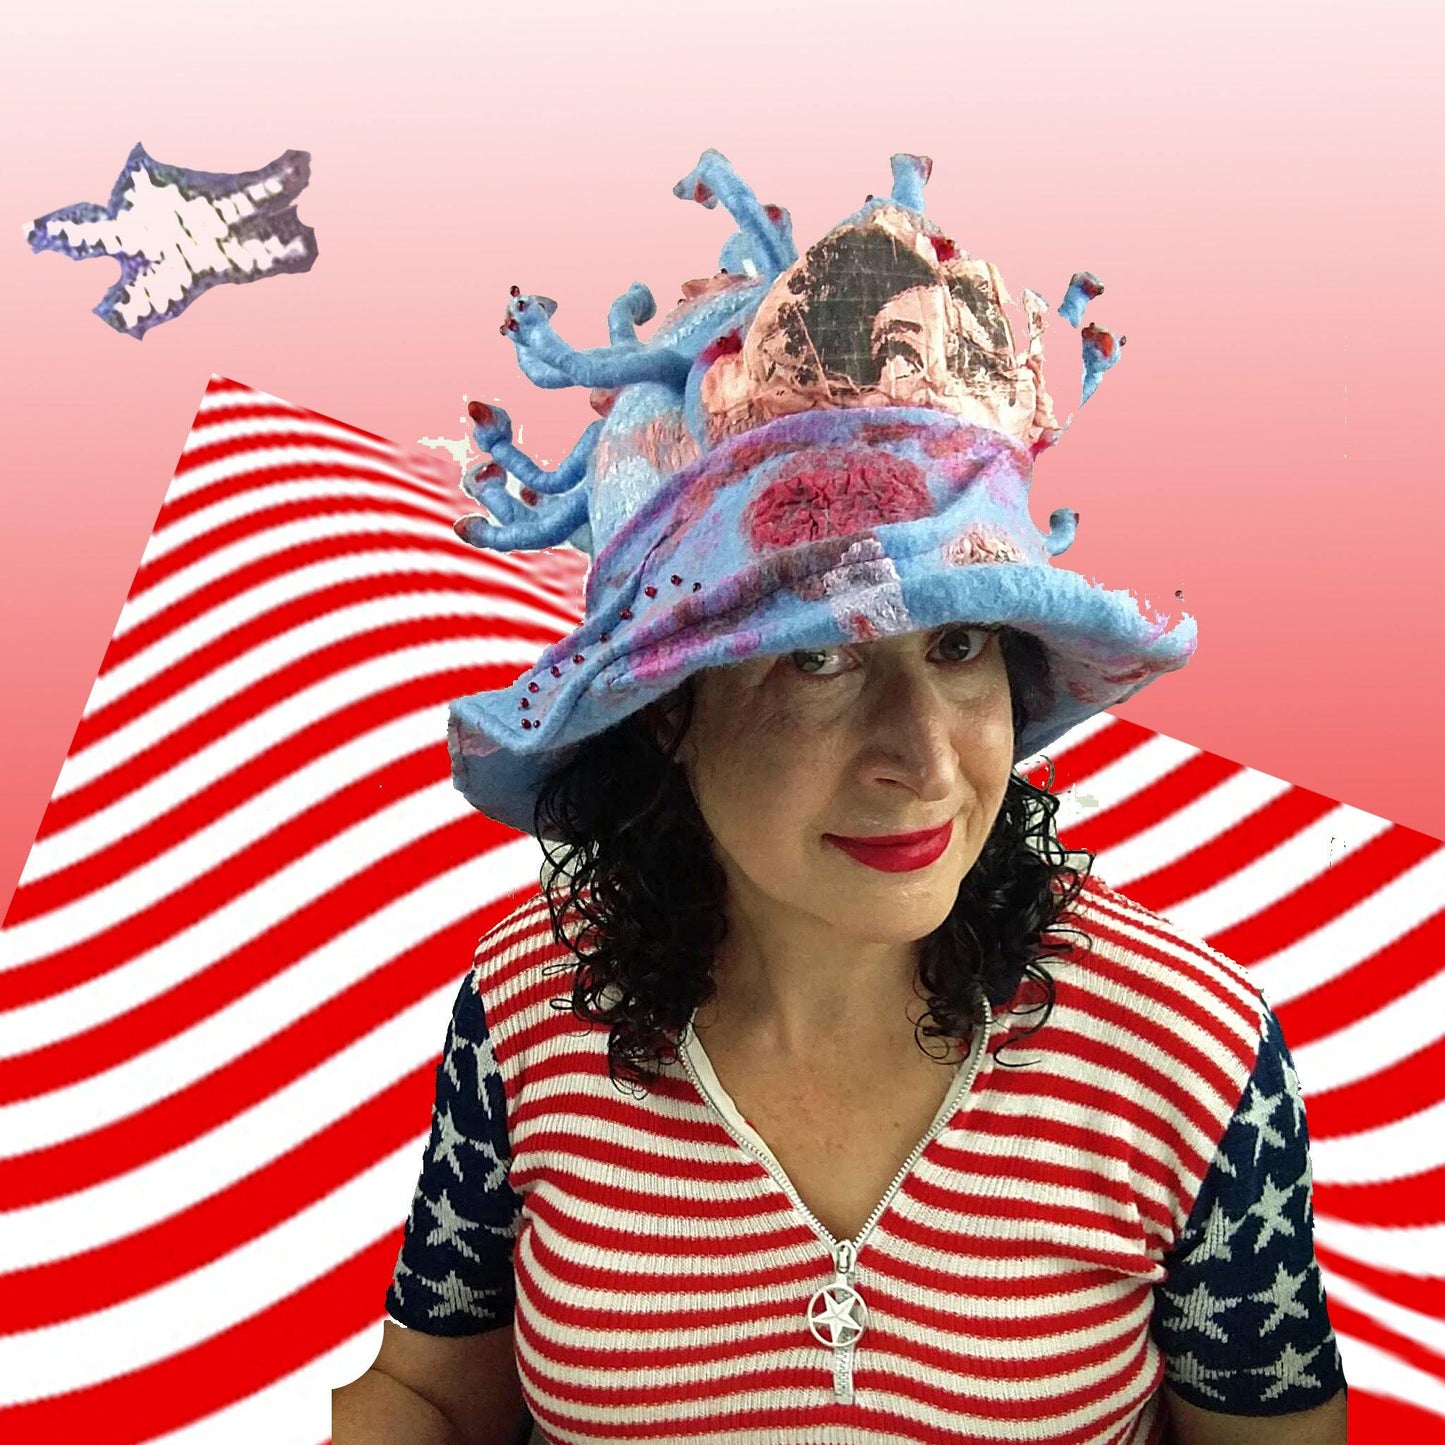 Pale Blue and Pink Hat inspired by Coronavirus with Eyes on it, worn by woman in USA flag inspired shirt.